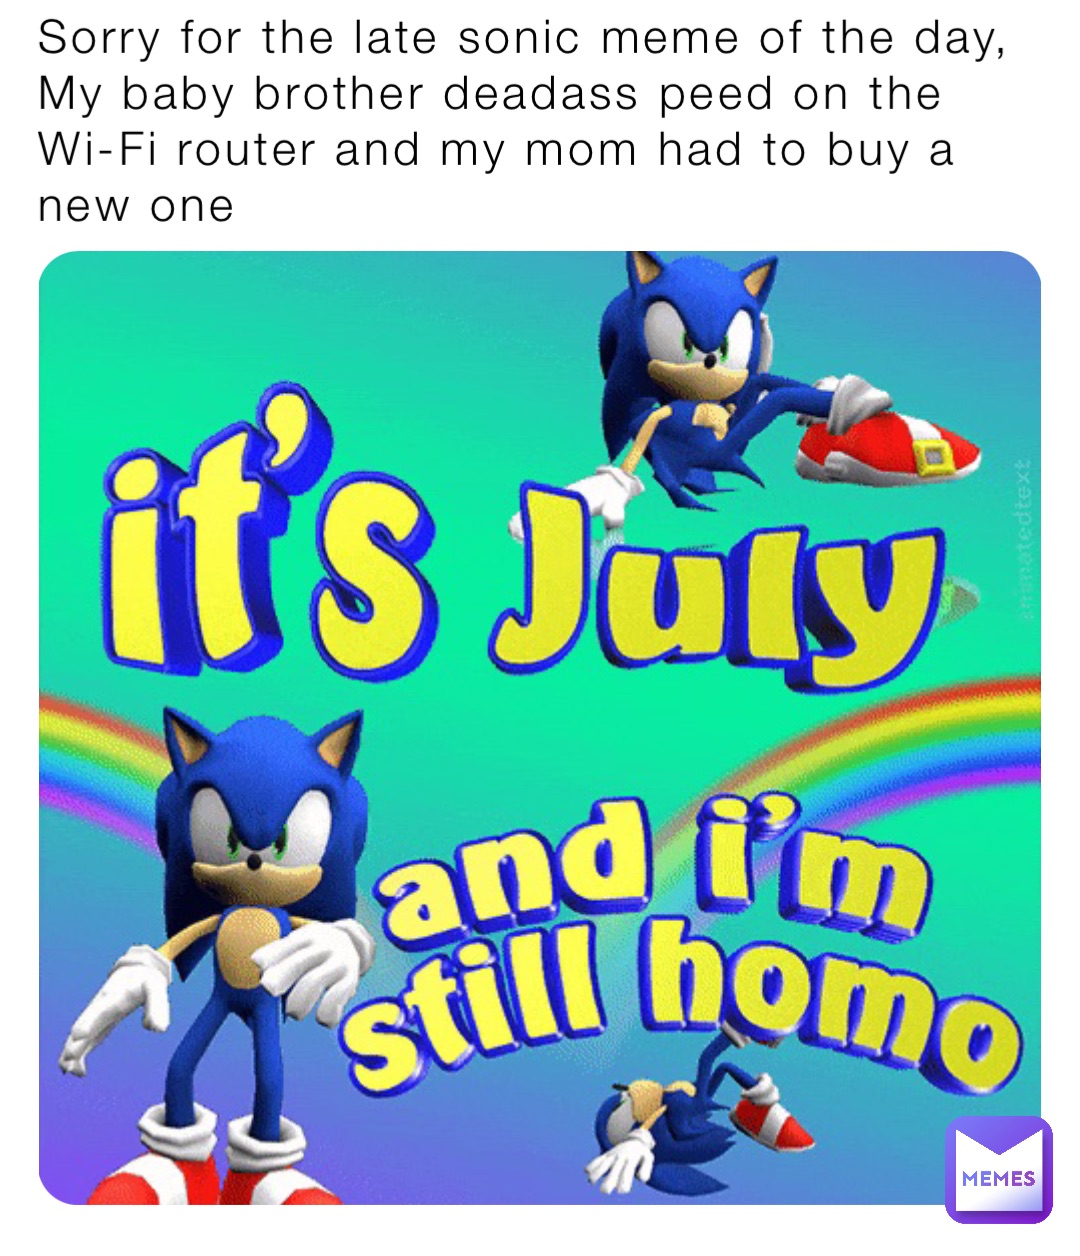 Sorry for the late sonic meme of the day, My baby brother deadass peed on the Wi-Fi router and my mom had to buy a new one